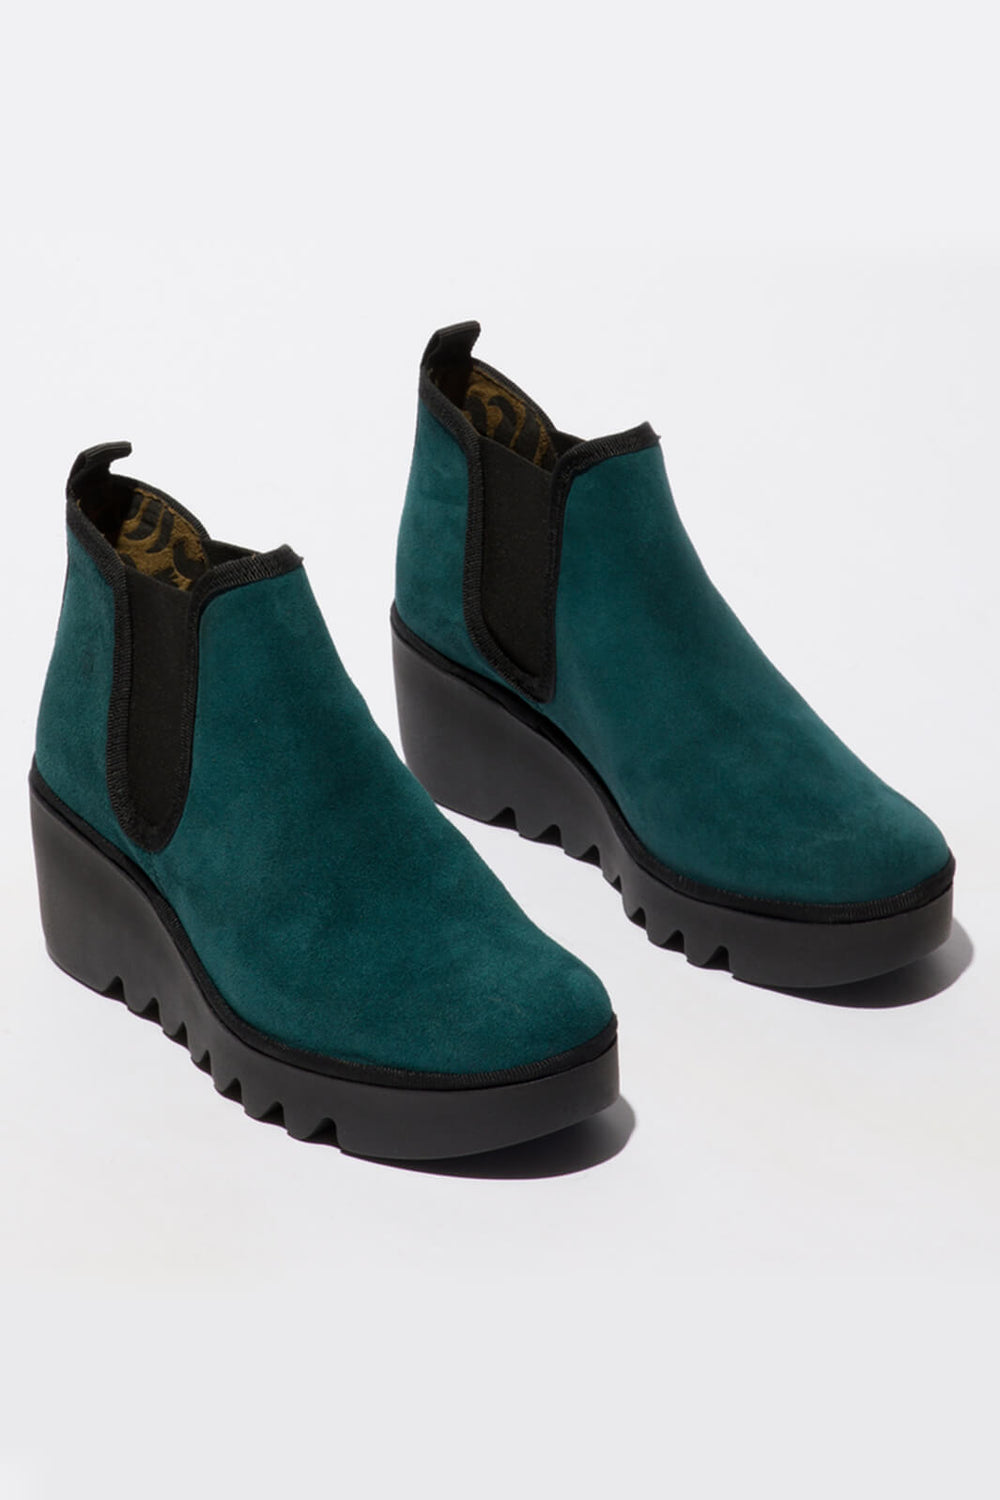 Fly London BYNE349FLY P501349009 Oil Suede Petrol Green Boots - Shirley Allum Boutique